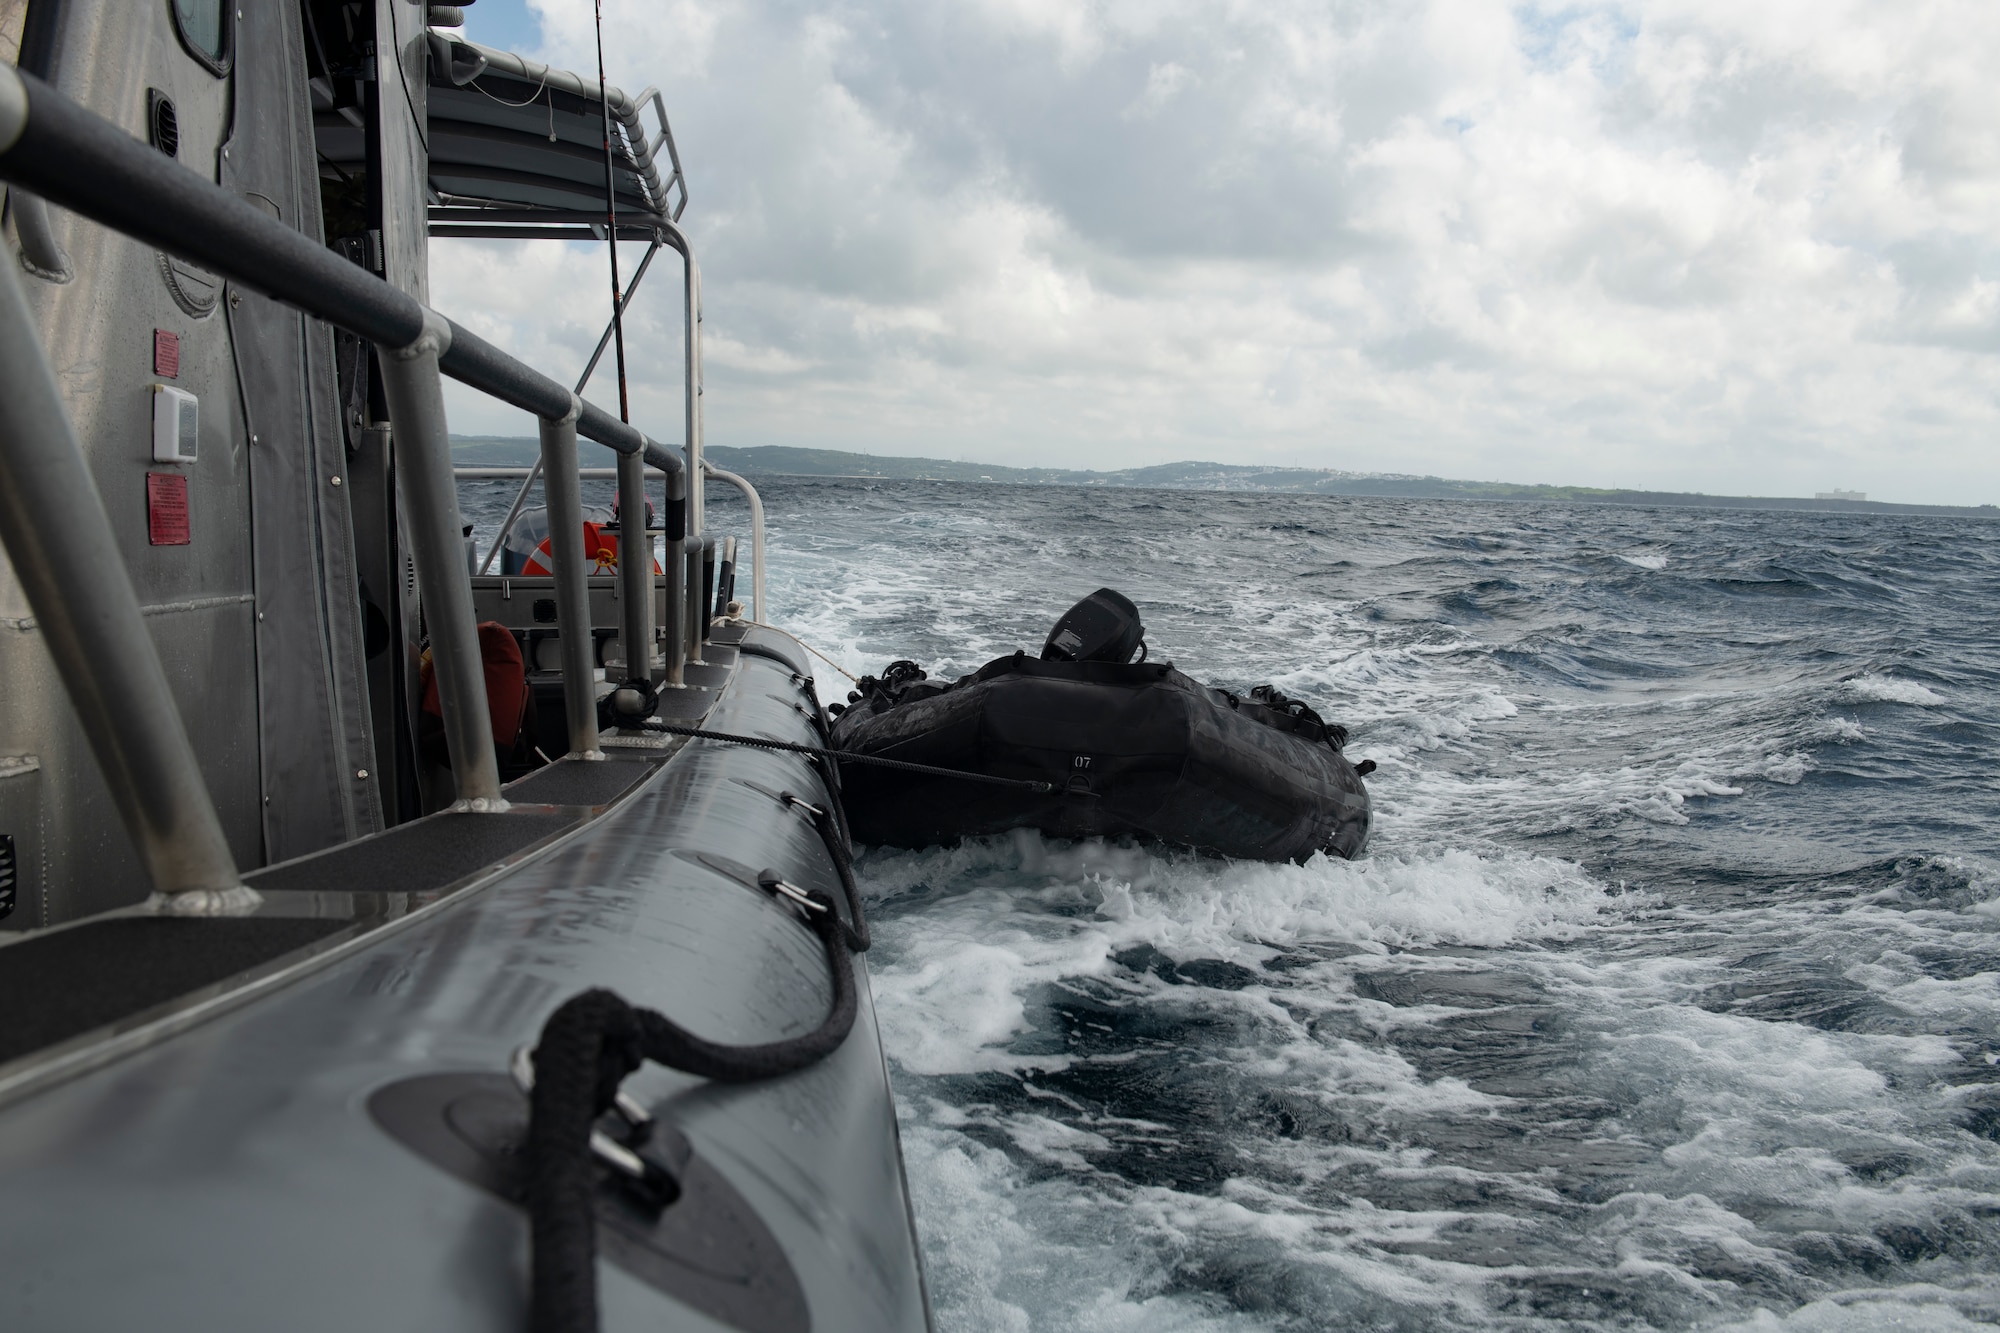 A combat rubber raiding craft is towed alongside the safe boat after the completion of a search and rescue exercise in the Pacific Ocean, Sept. 13, 2022. The training was conducted to enhance alternate insertion and extraction method capabilities, ensuring RQS personnel are ready to rapidly respond at a moment's notice. (U.S. Air Force photo by Senior Airman Jessi Monte)